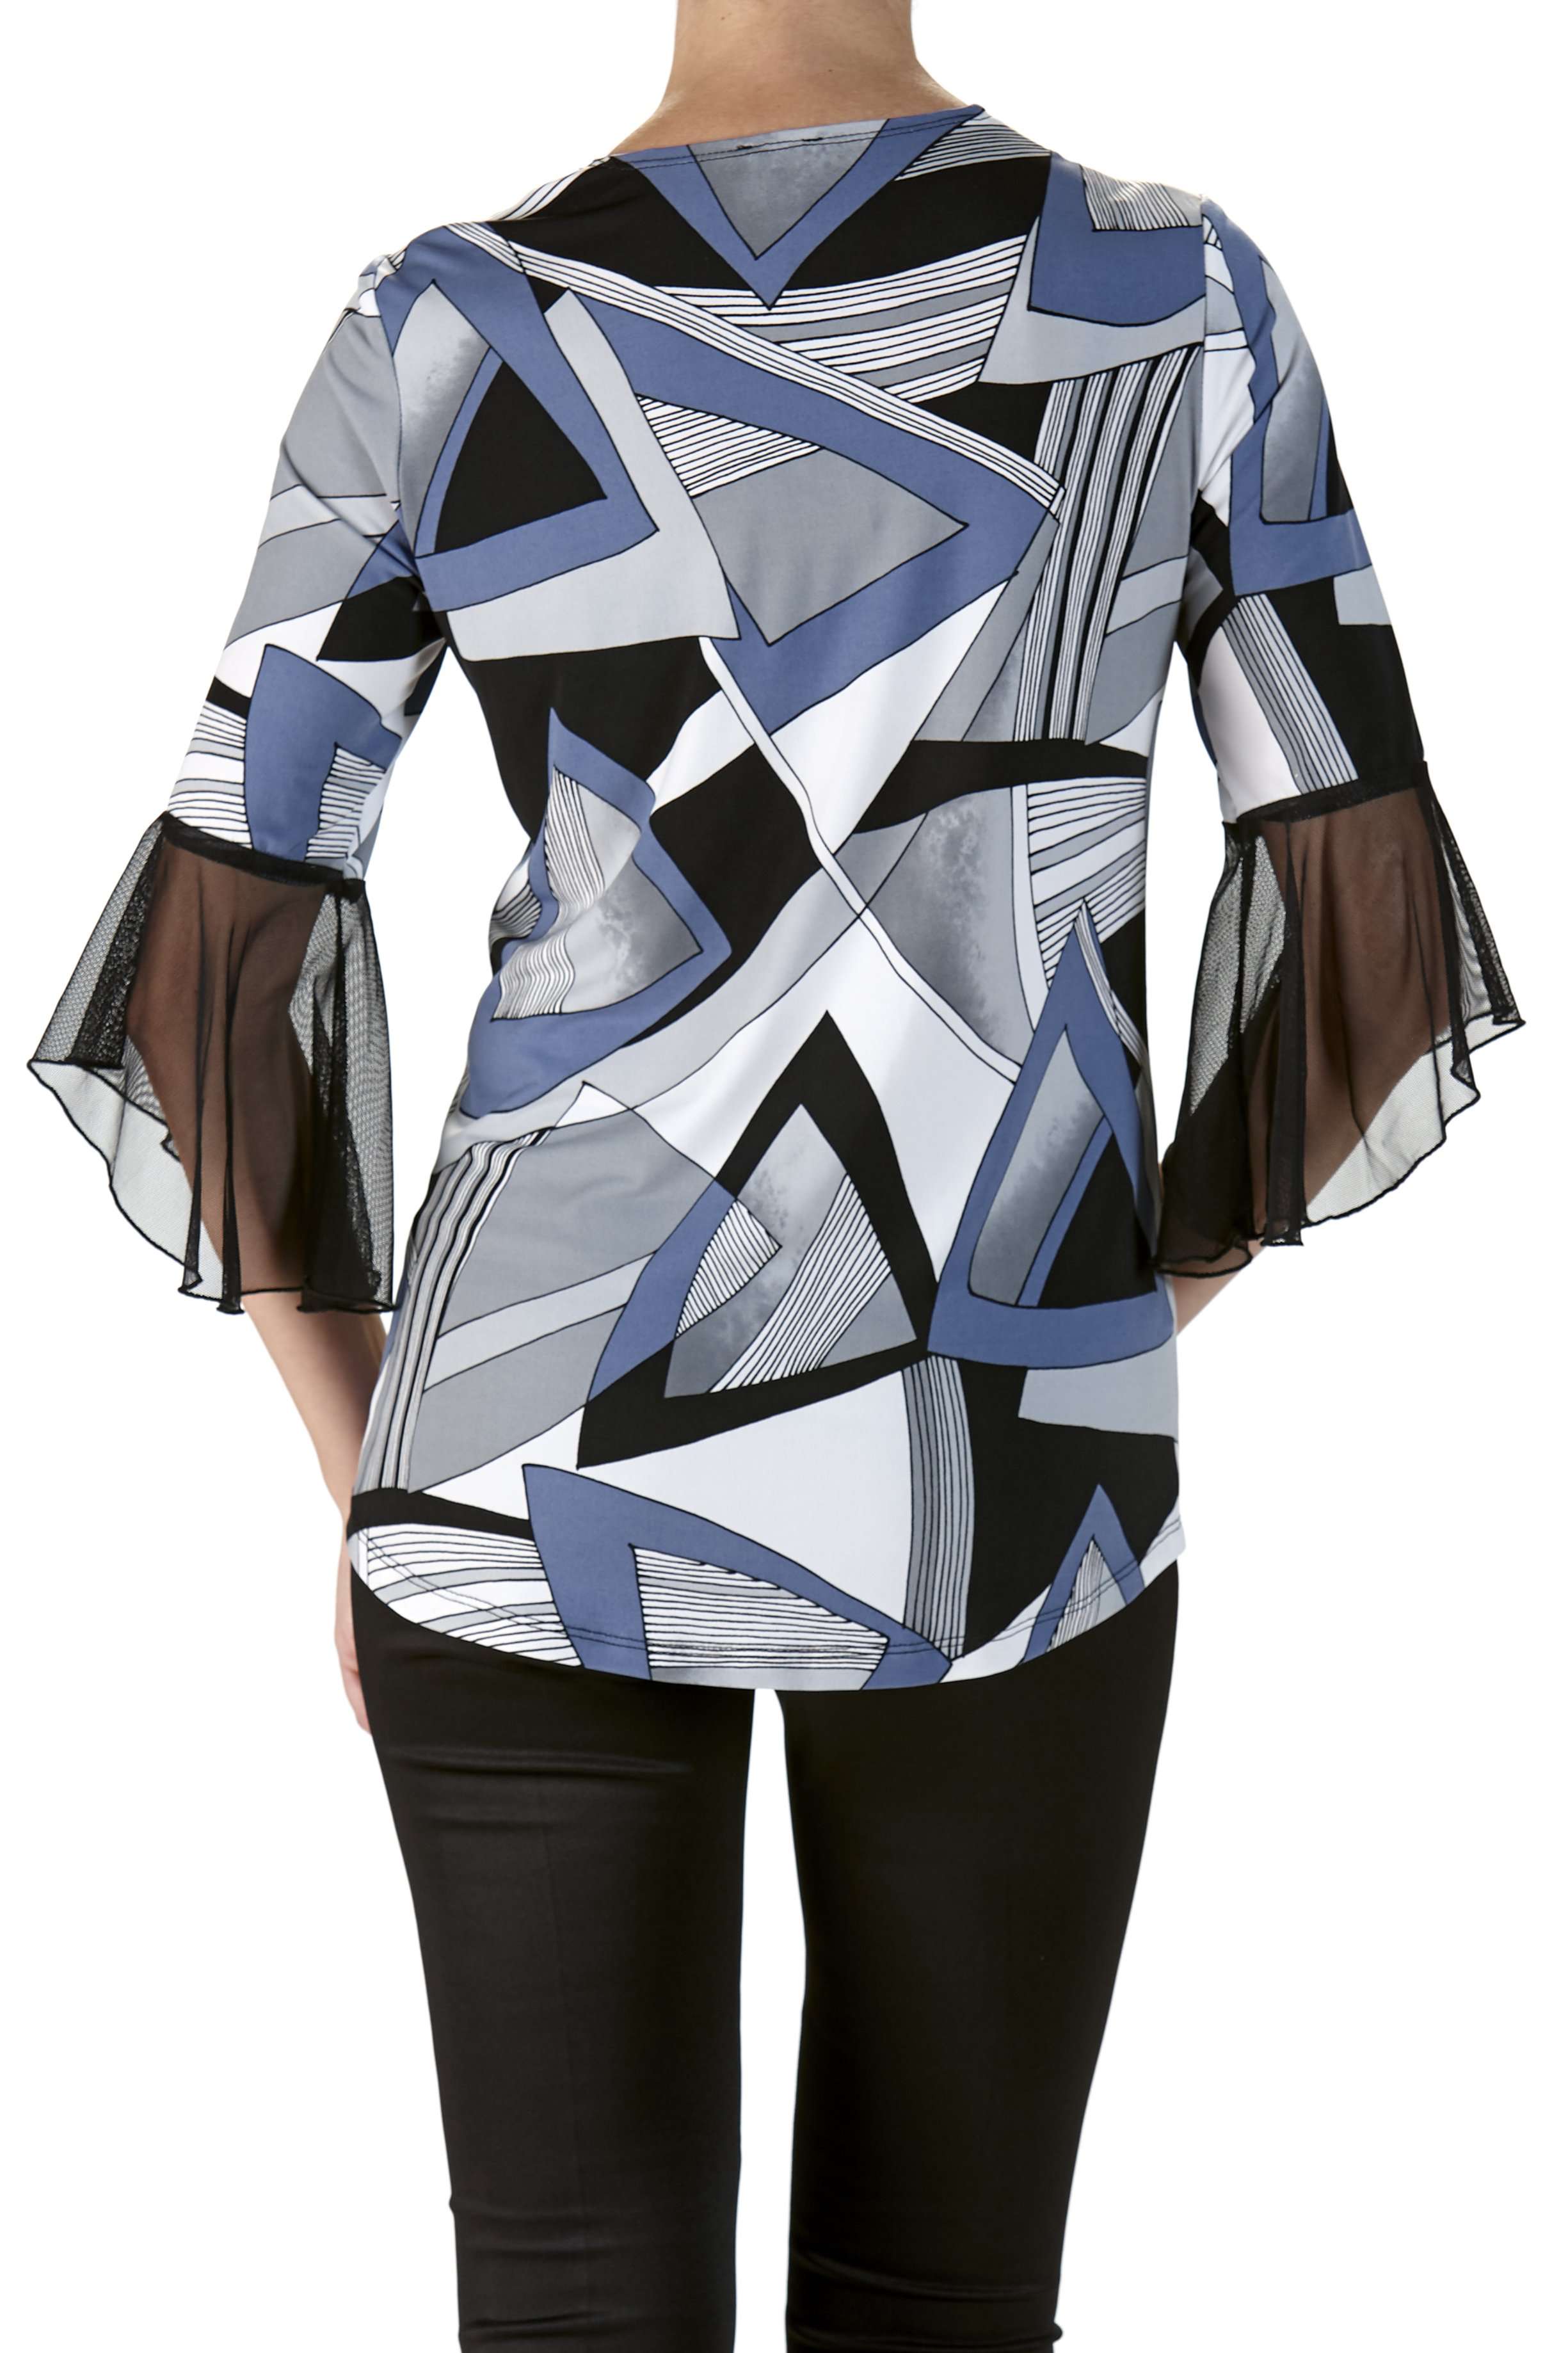 Women's Tops on Sale Canada Flattering Fit Quality Stretch fabric Blue and Black Print Made in Canada Yvonne Marie Boutiques - Yvonne Marie - Yvonne Marie